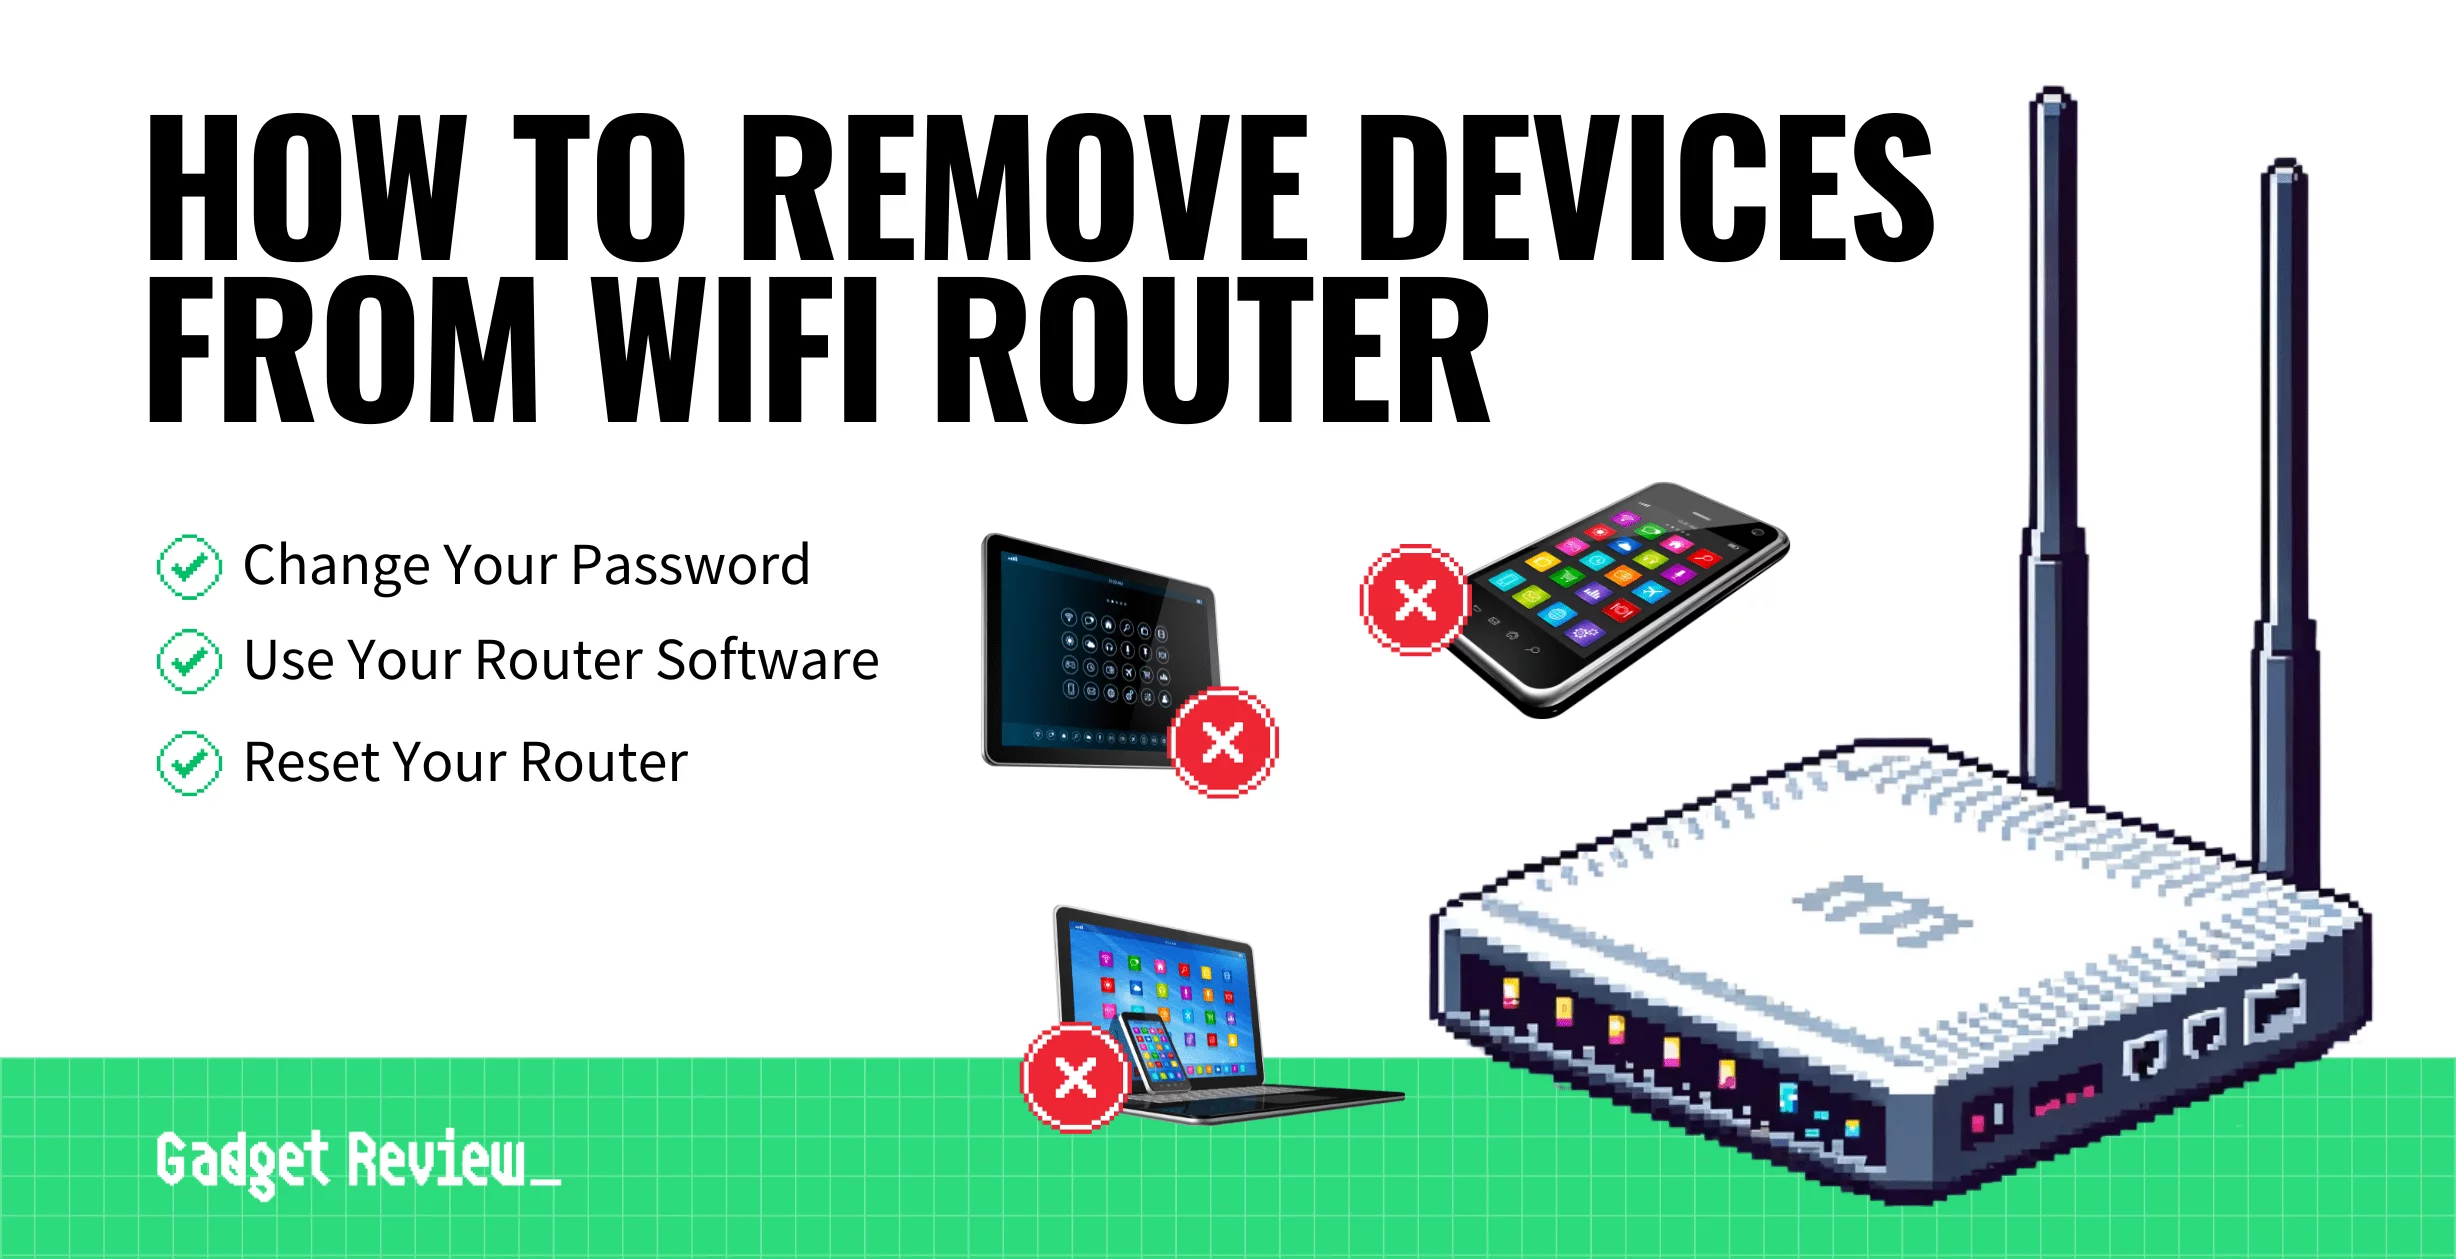 how to remove devices from wifi router guide